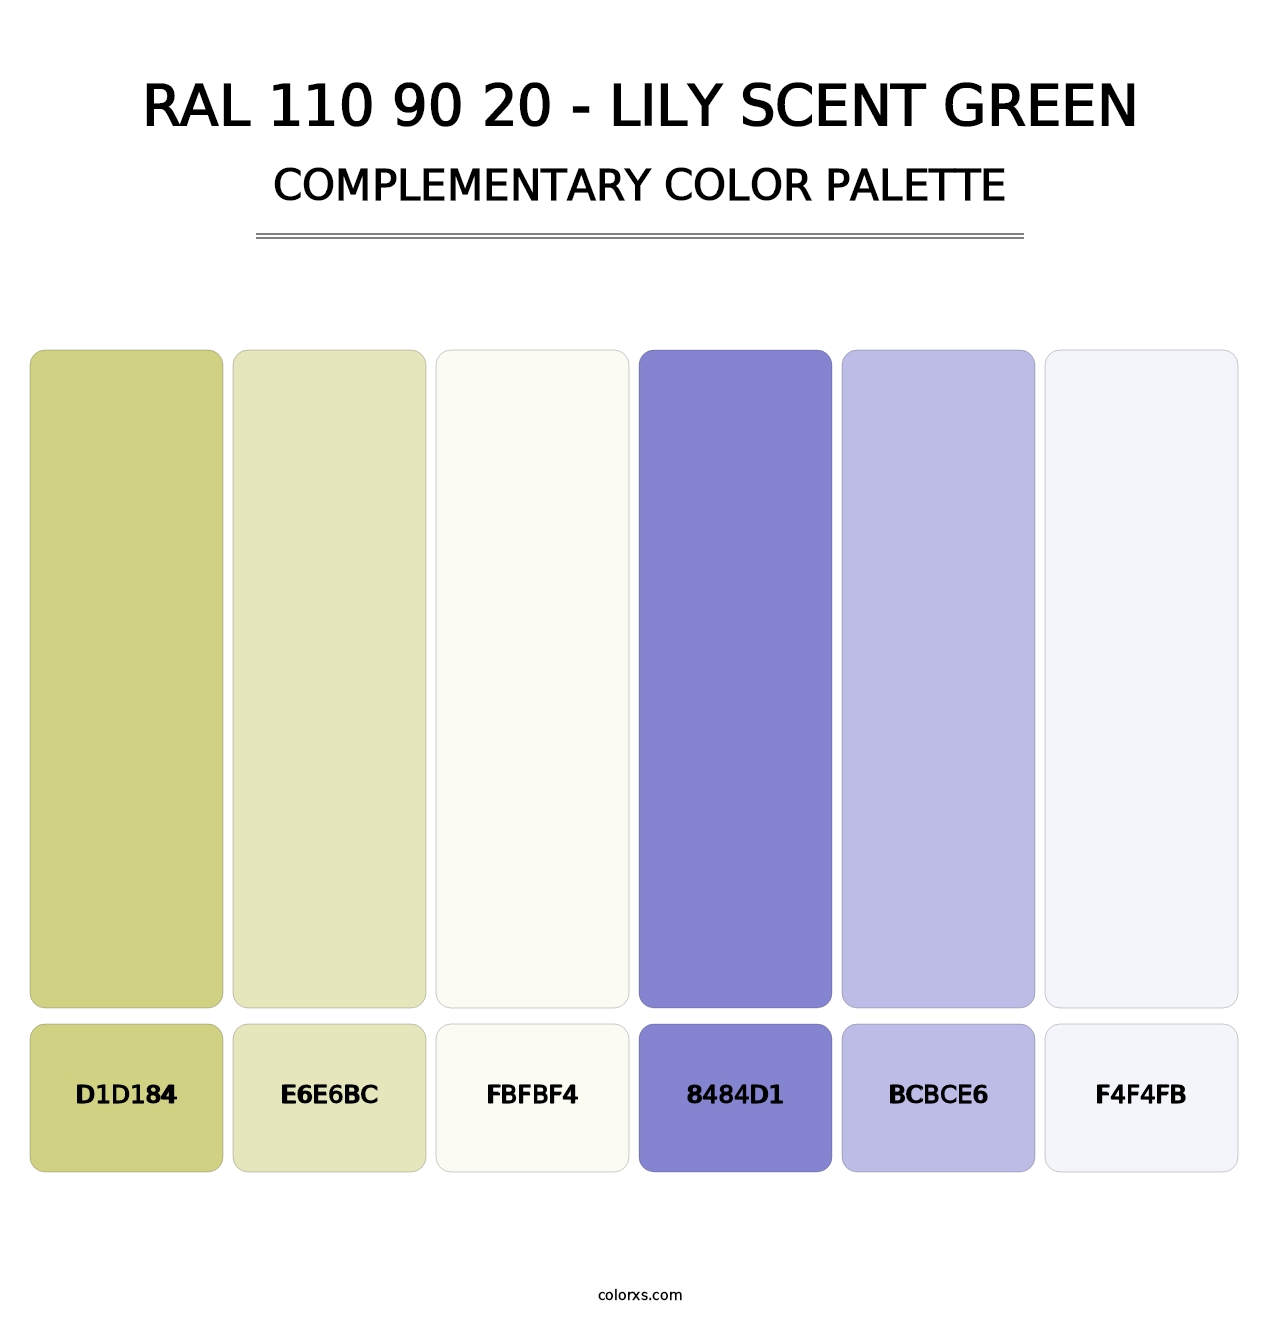 RAL 110 90 20 - Lily Scent Green - Complementary Color Palette